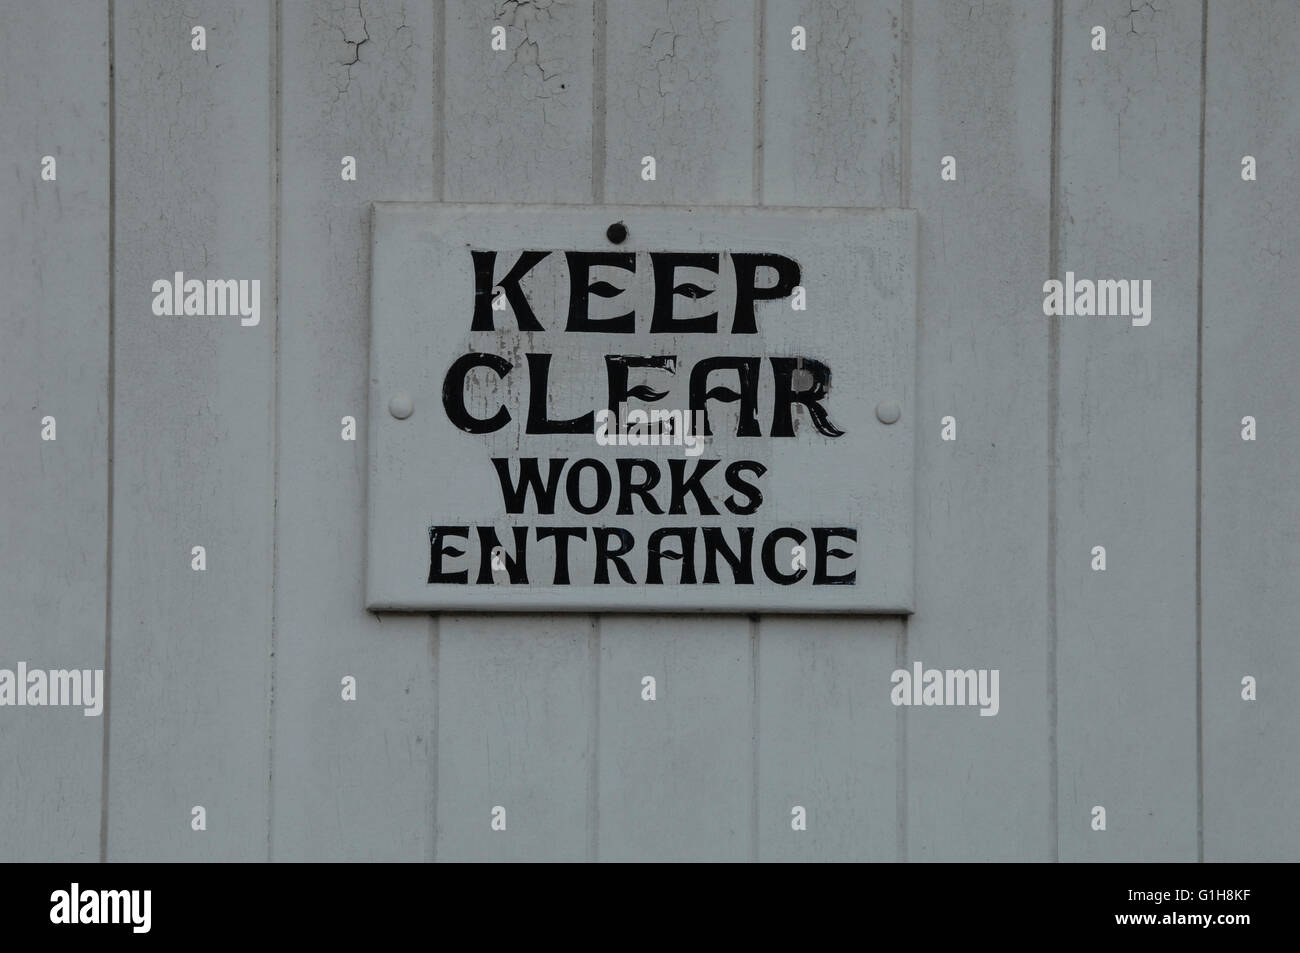 Keep clear sign for works entrance in Sandwich - Kent Stock Photo